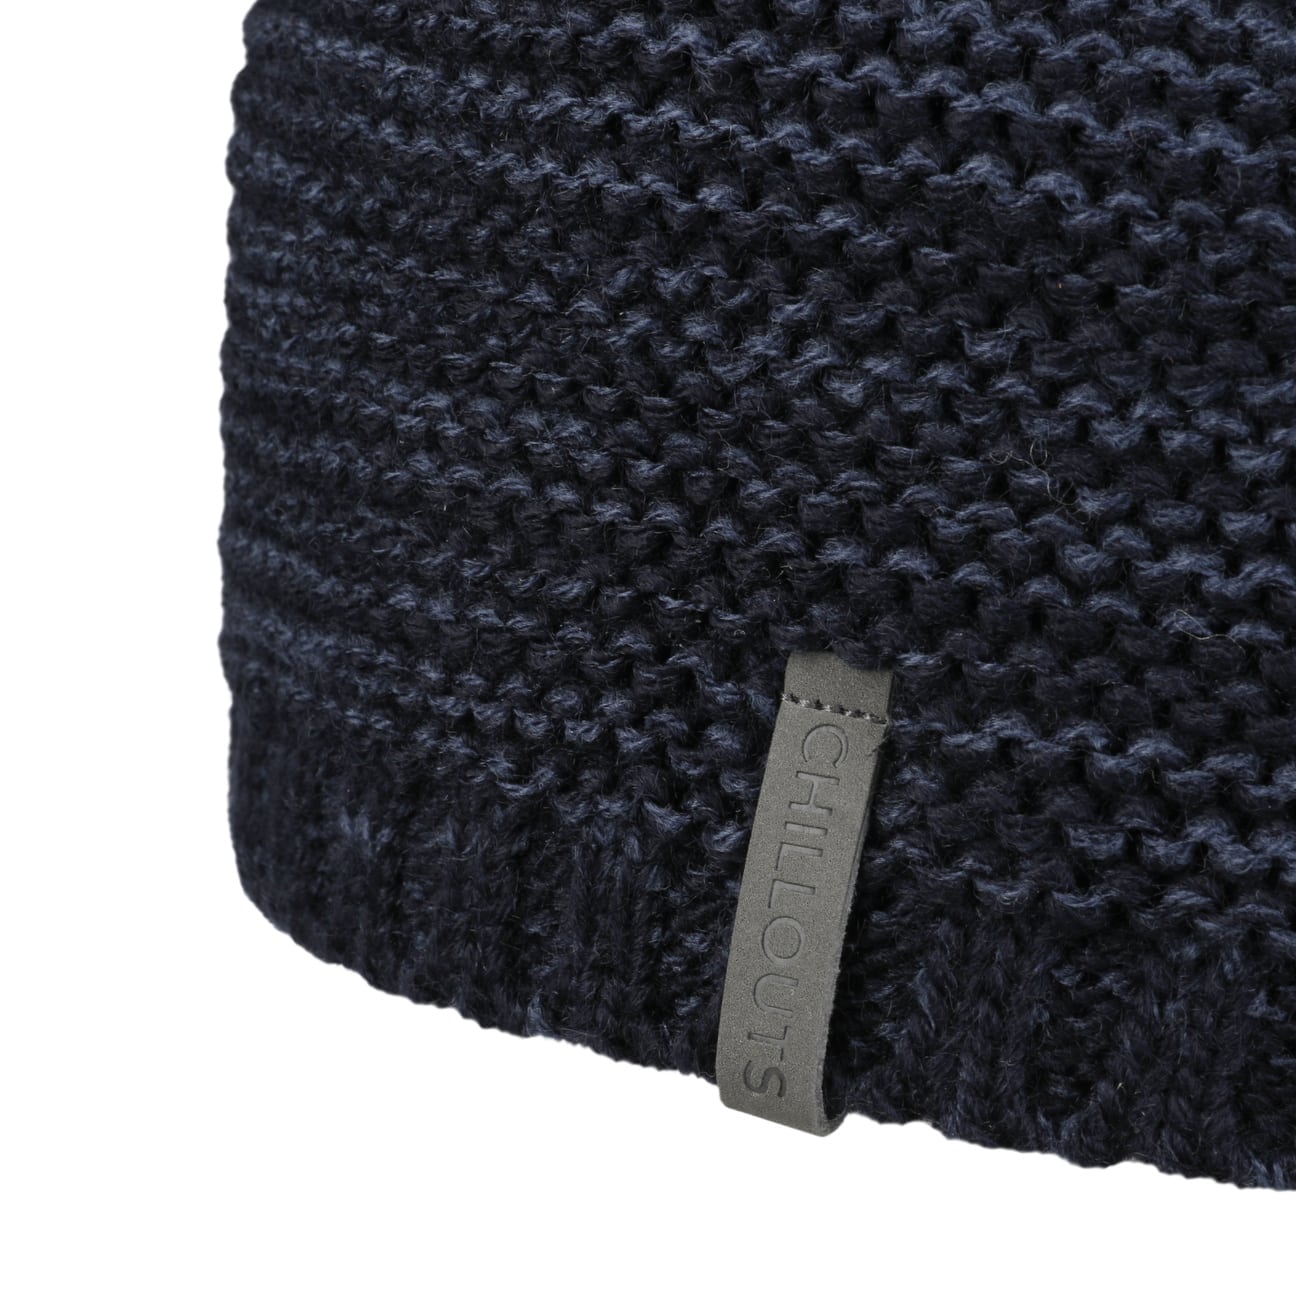 Keith Beanie Hat by Chillouts - 37,95 €